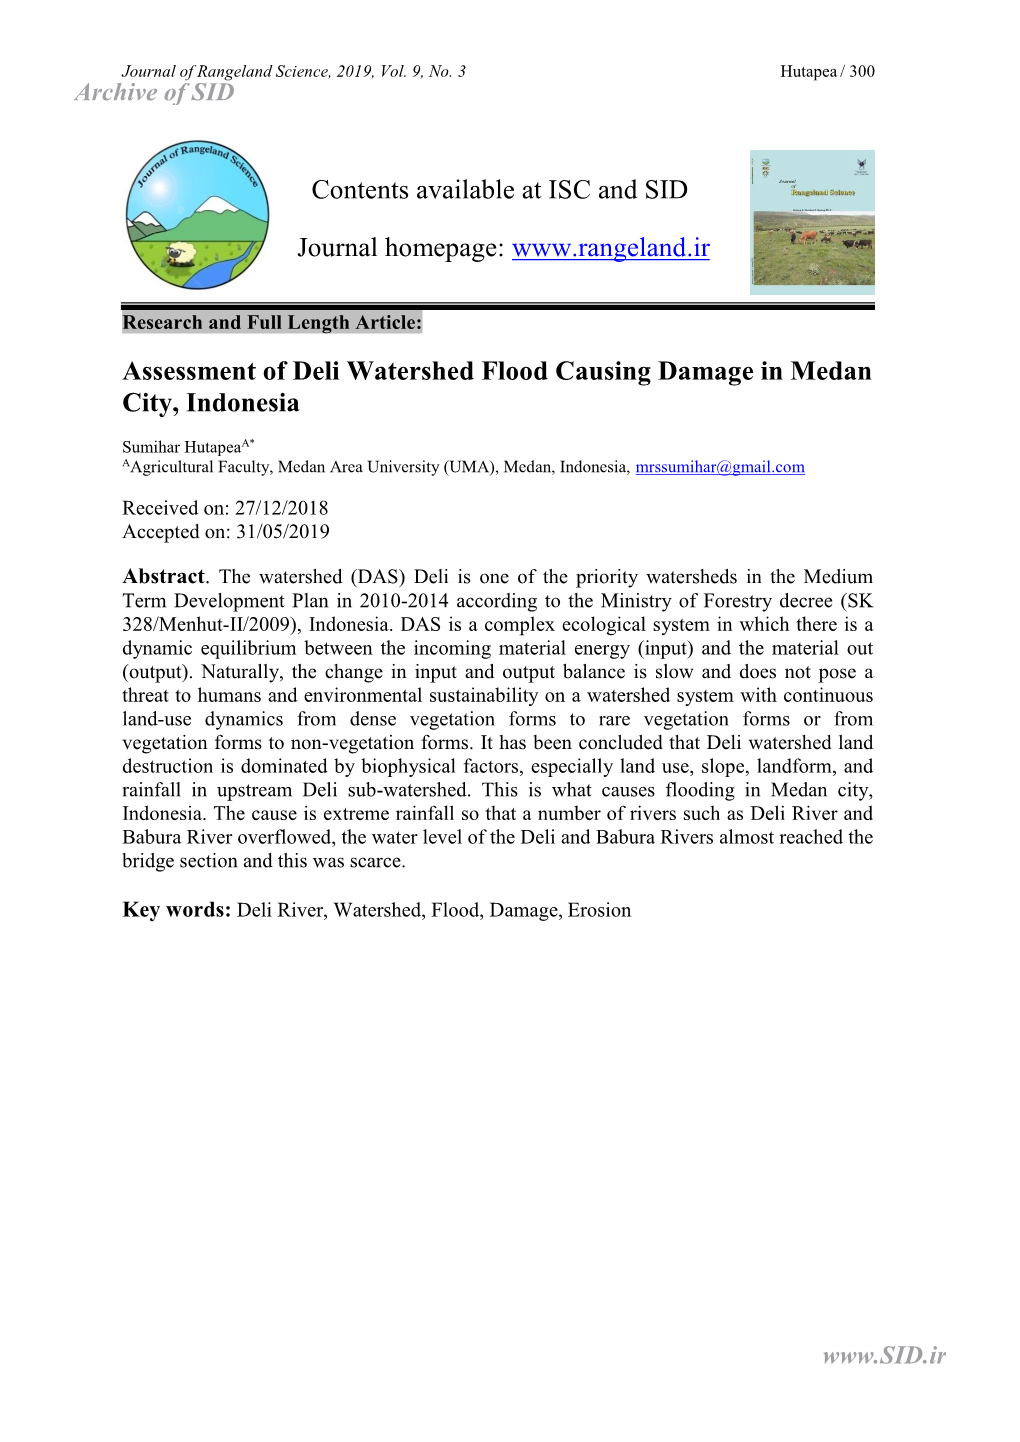 Assessment of Deli Watershed Flood Causing Damage in Medan City, Indonesia